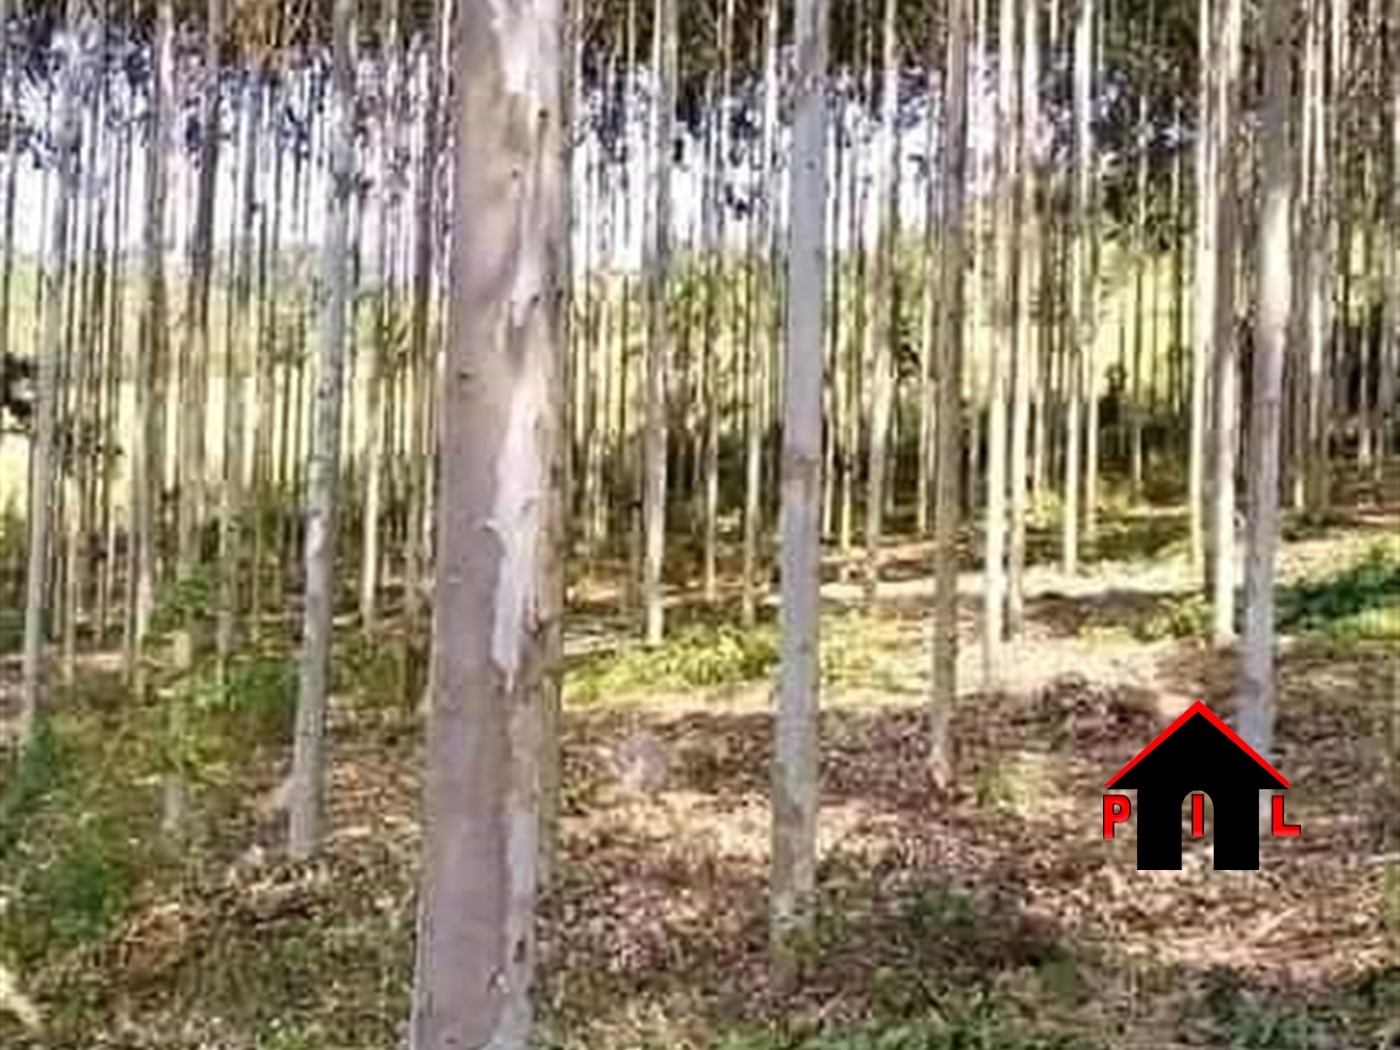 Agricultural Land for sale in Lukaya Kayunga